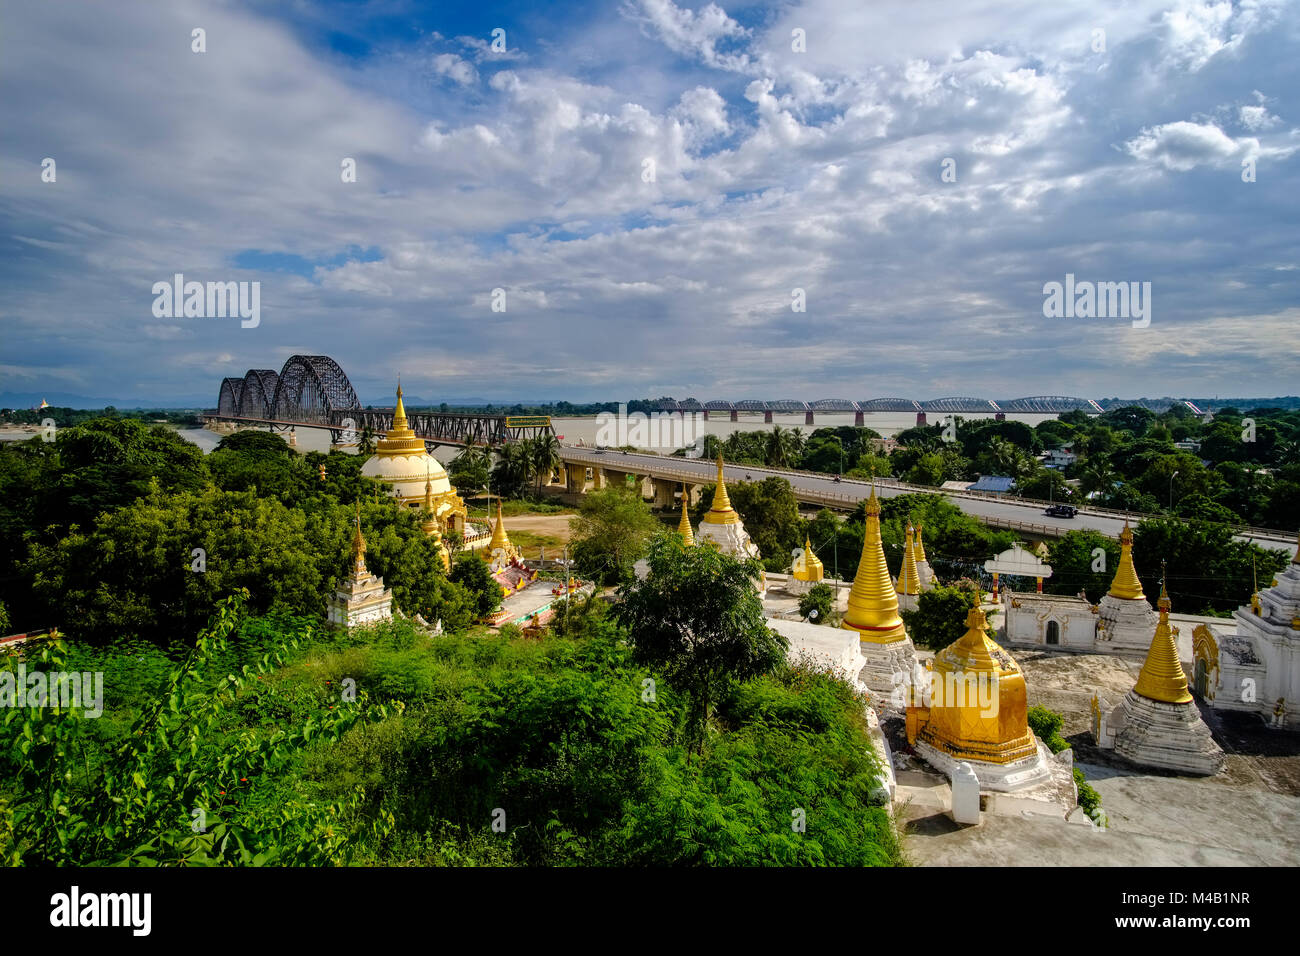 Some of many golden Pagodas on Sagaing Hill, the Yadanabon Bridge crossing the Irrawaddy river in the distance Stock Photo